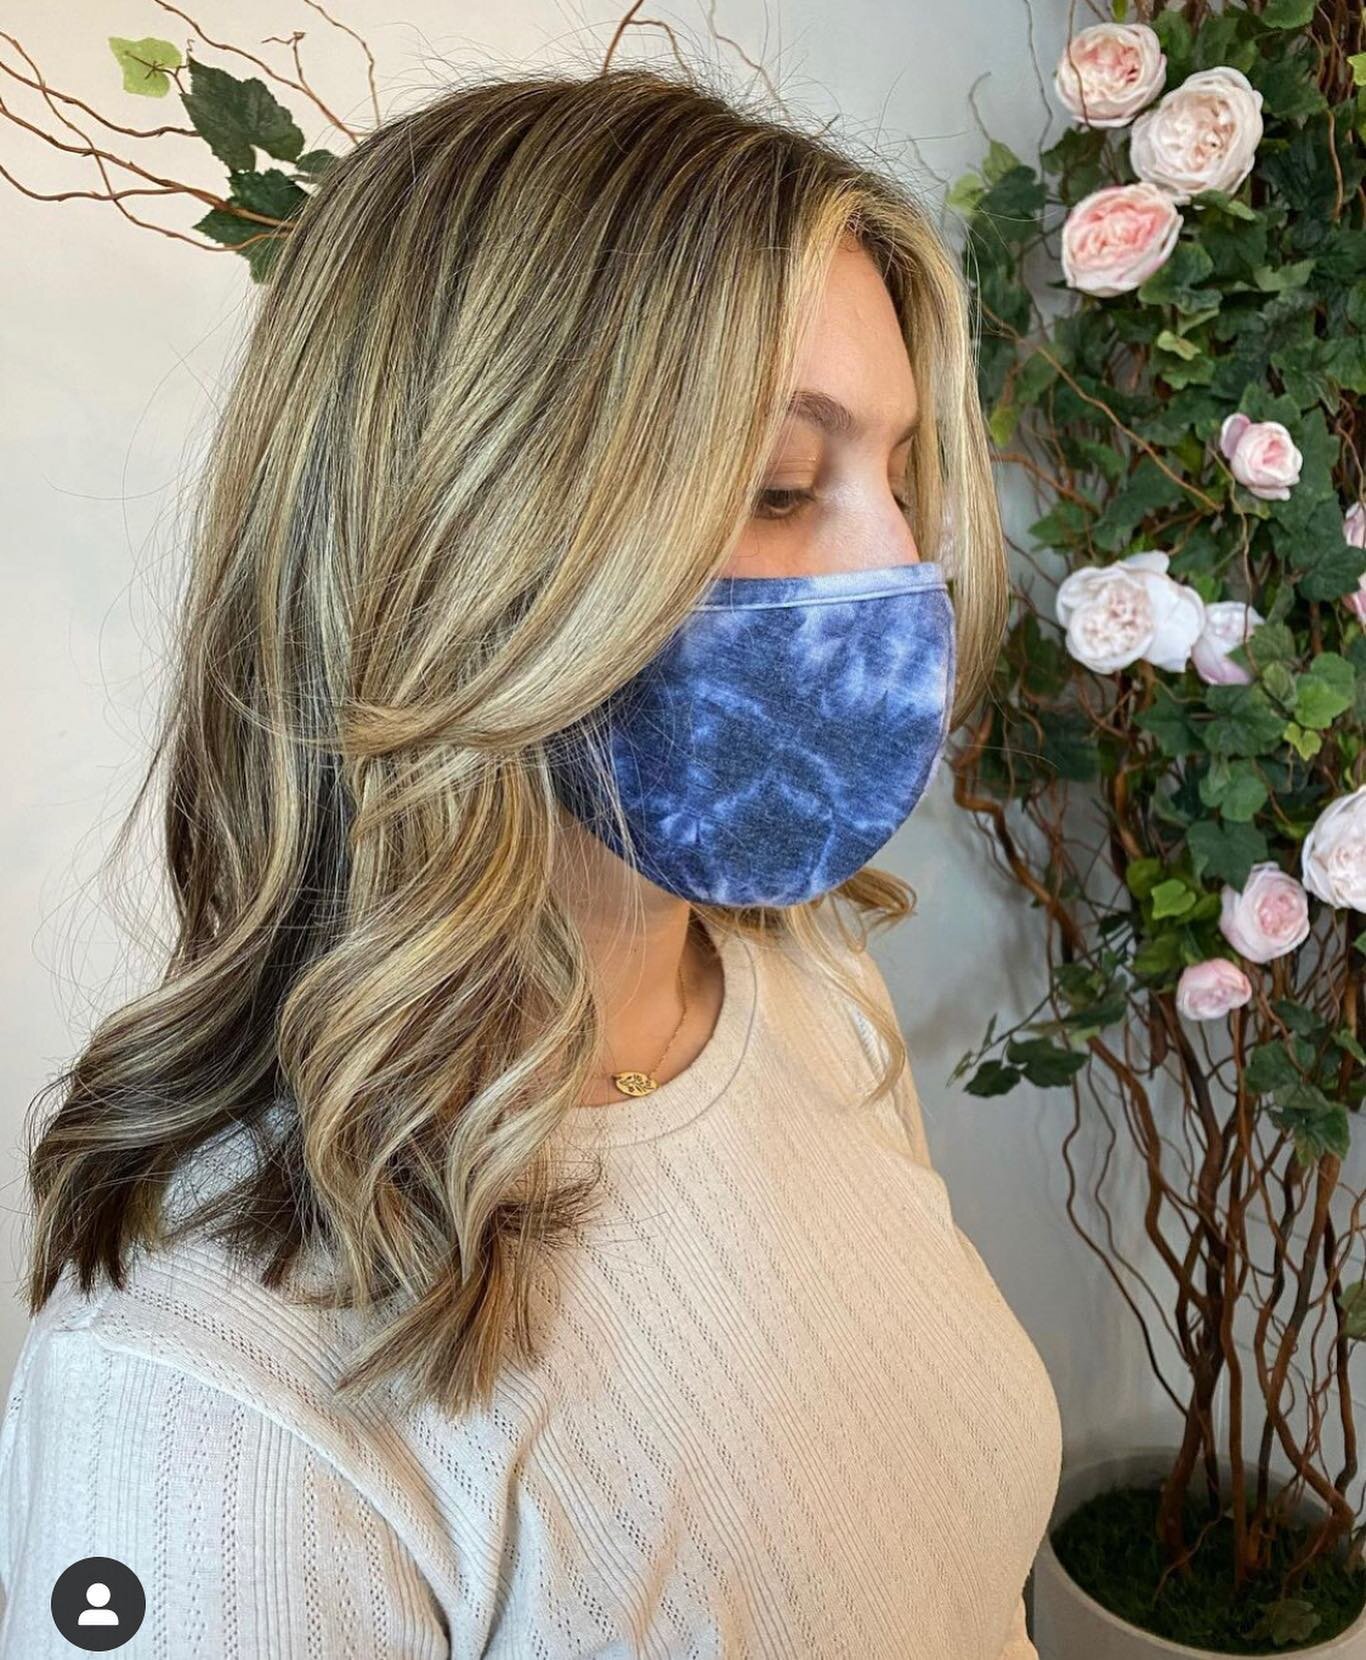 Pops of blonde and curtain bangs are definitely in this spring and we are loving it! .
.
Beautiful work by @ash.wil.style .
.
#fairfieldcounty #fairfieldmoms #fairfieldcthair #fairfield #fairfieldhairstylist #cthairstylist #cthairsalon #cthair #cthai